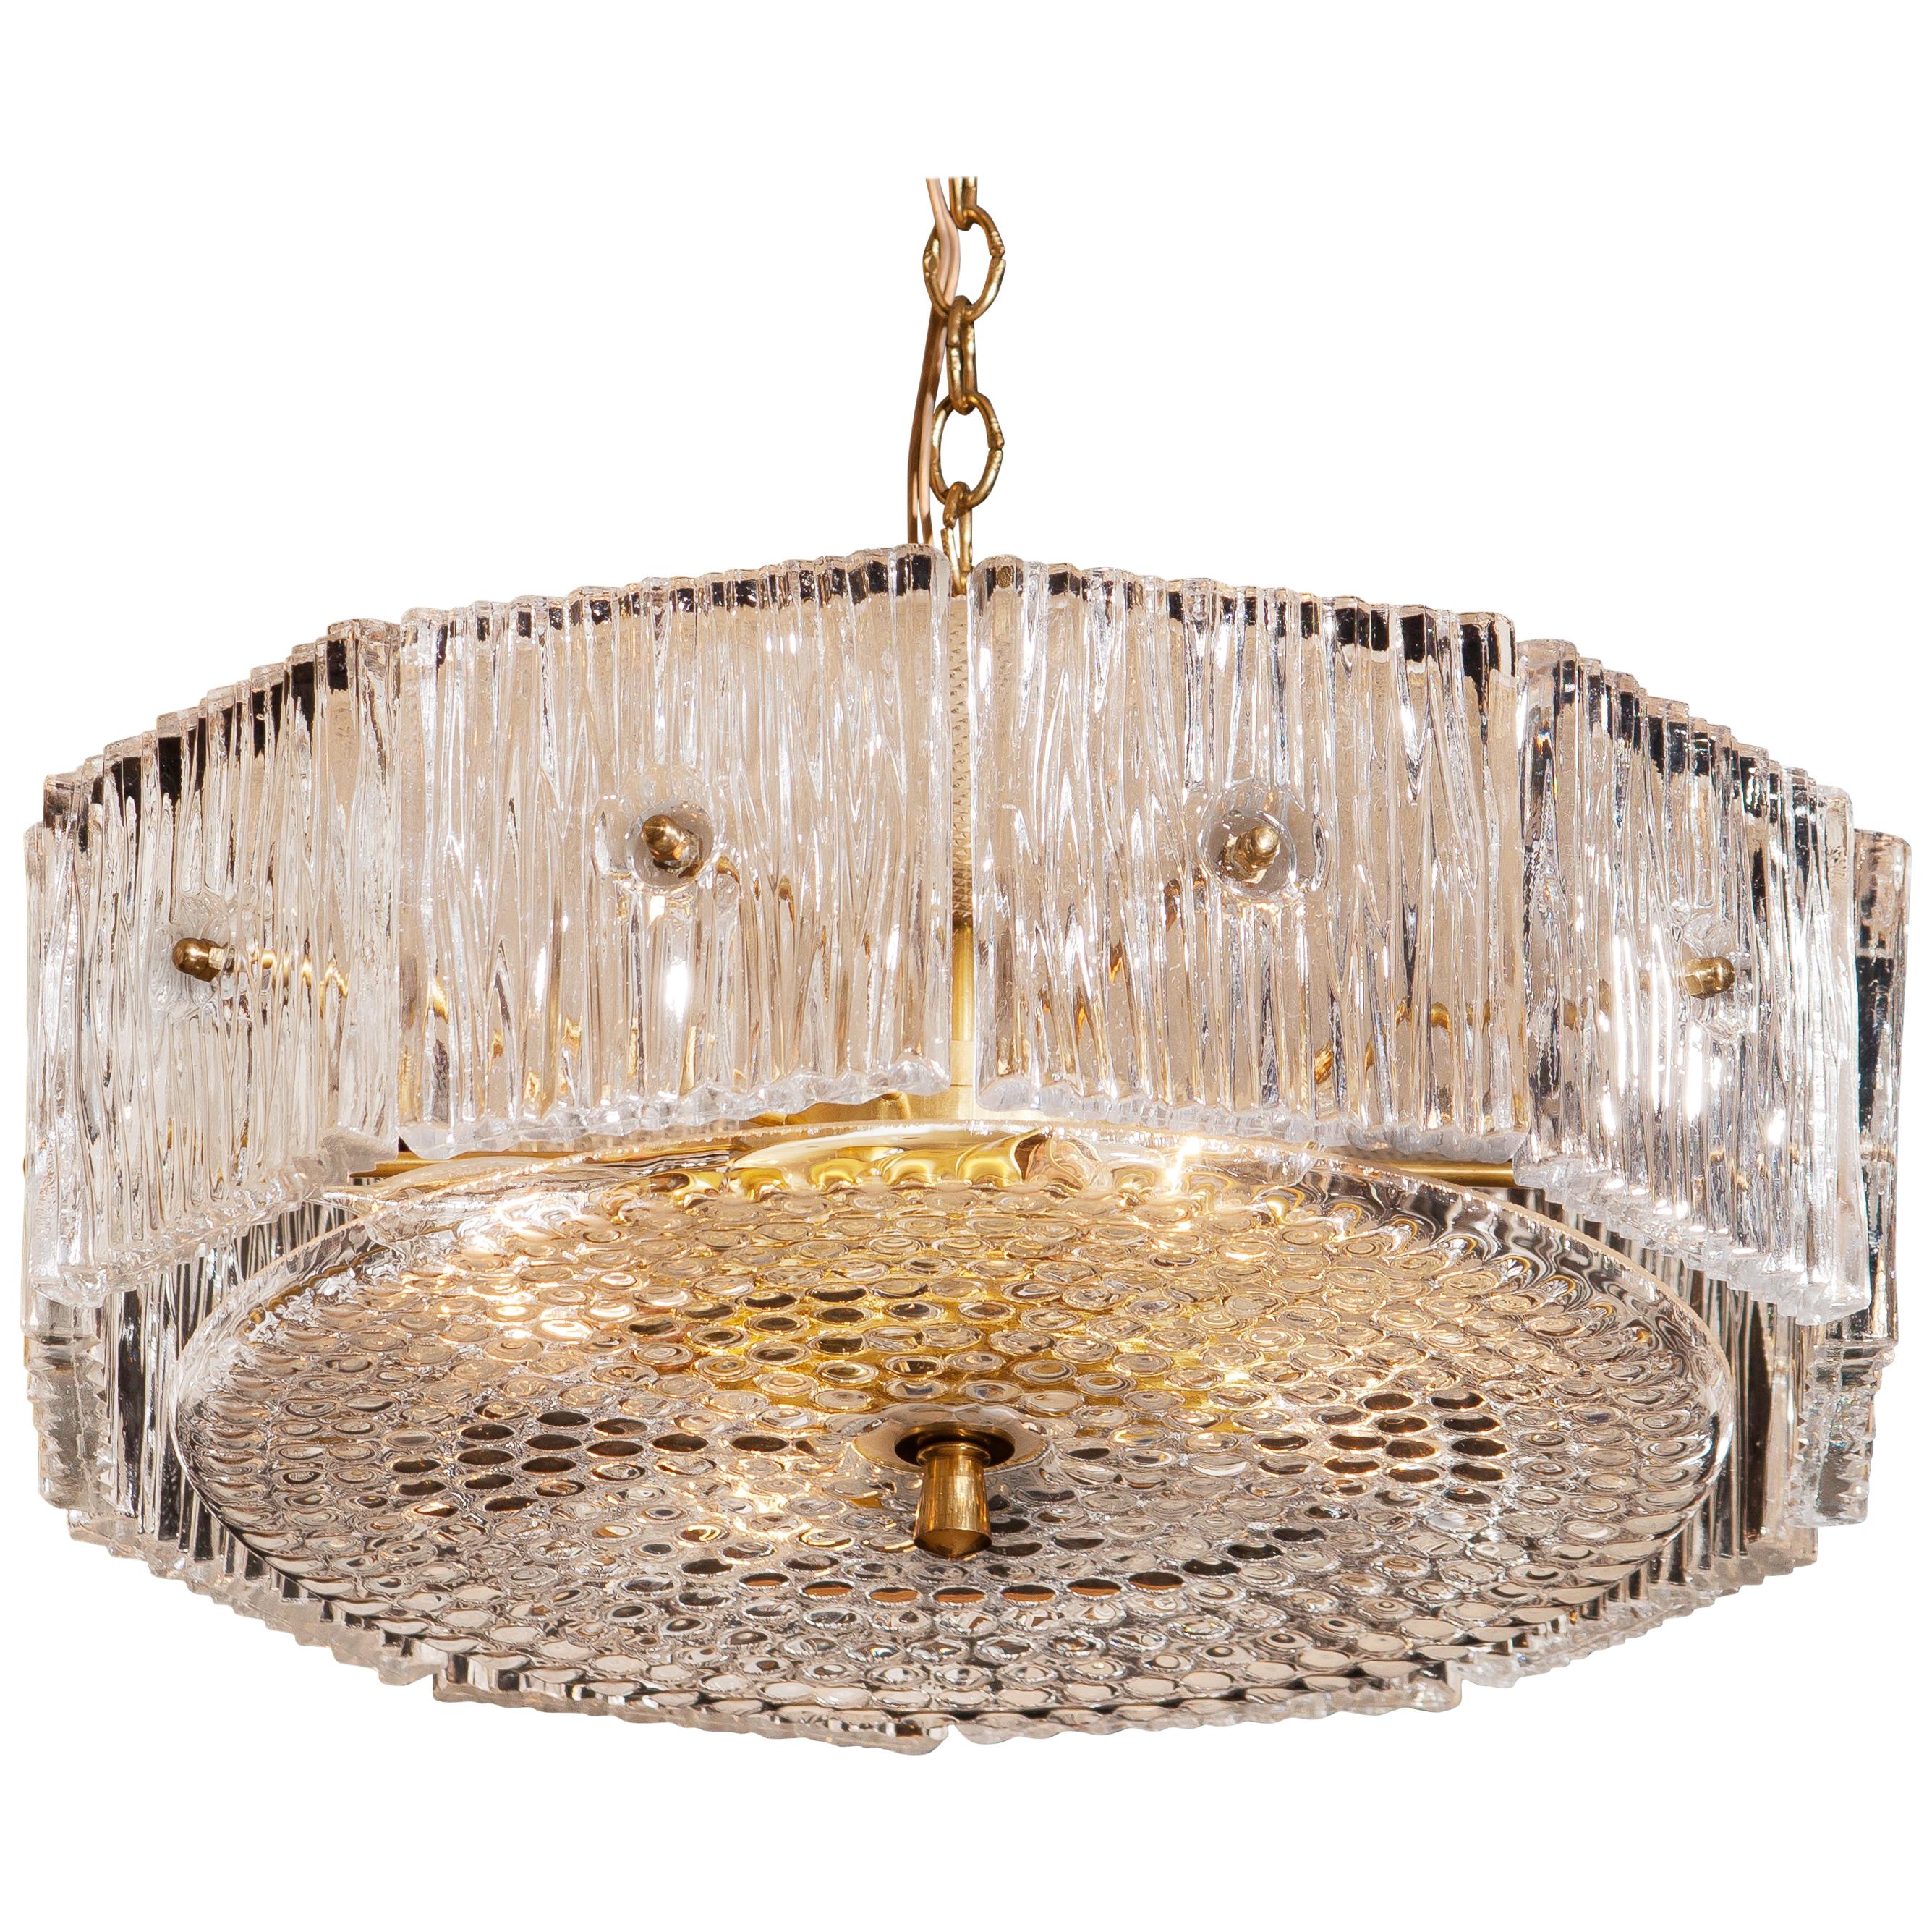 Brass and clear crystal chandelier or pendant designed by Carl Fagerlund for Orrefors, Sweden.
This chandelier or pendant is in excellent condition and technically 100%.
Wired for 220 / 110 volt.
Period: 1960.
The dimensions of the crystal parts